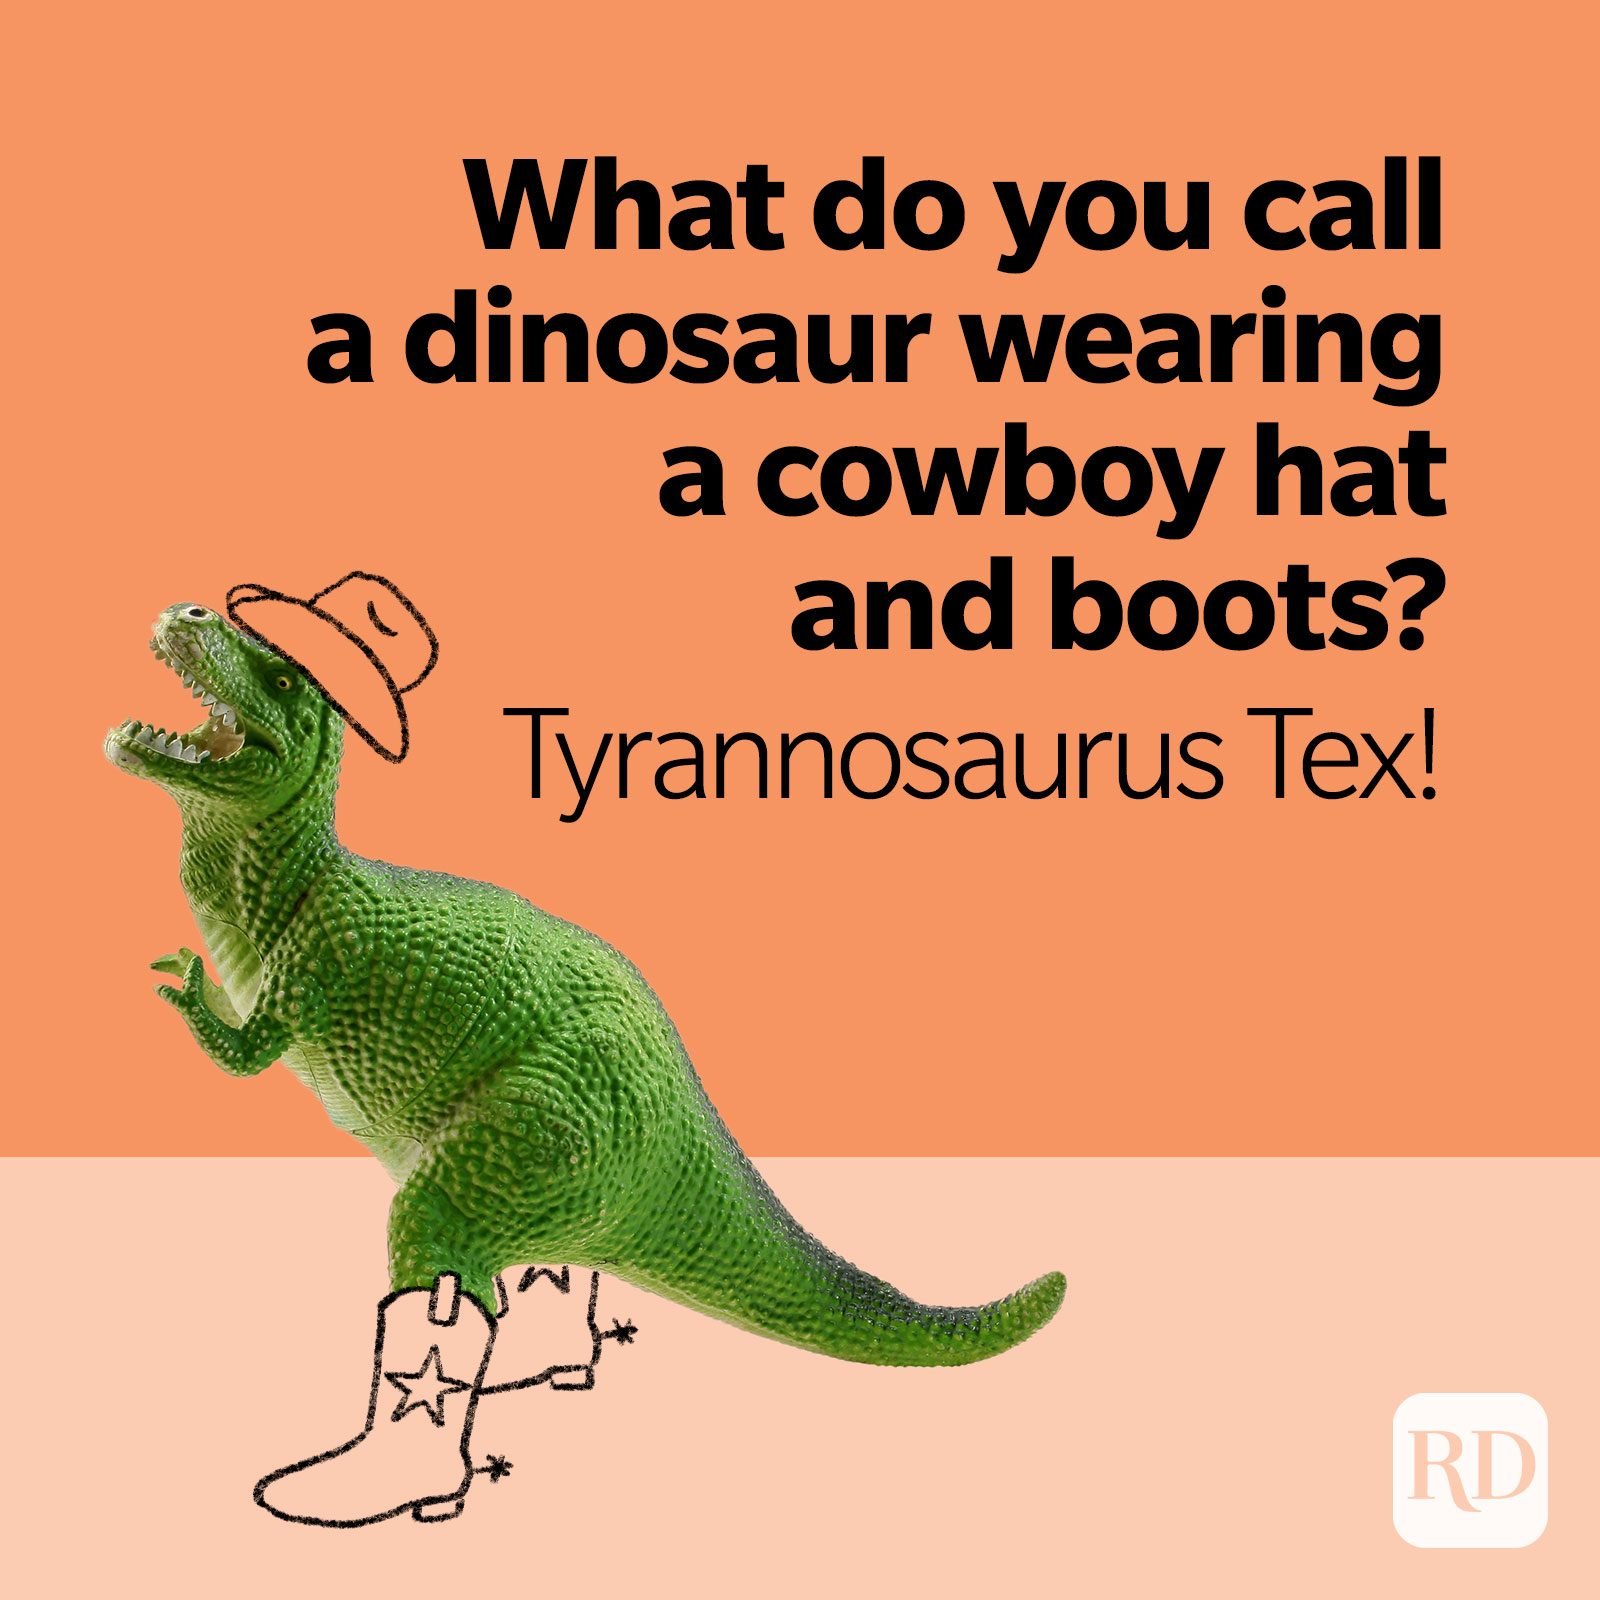 40 Dinosaur Jokes That Will Have You Roaring | Reader's Digest